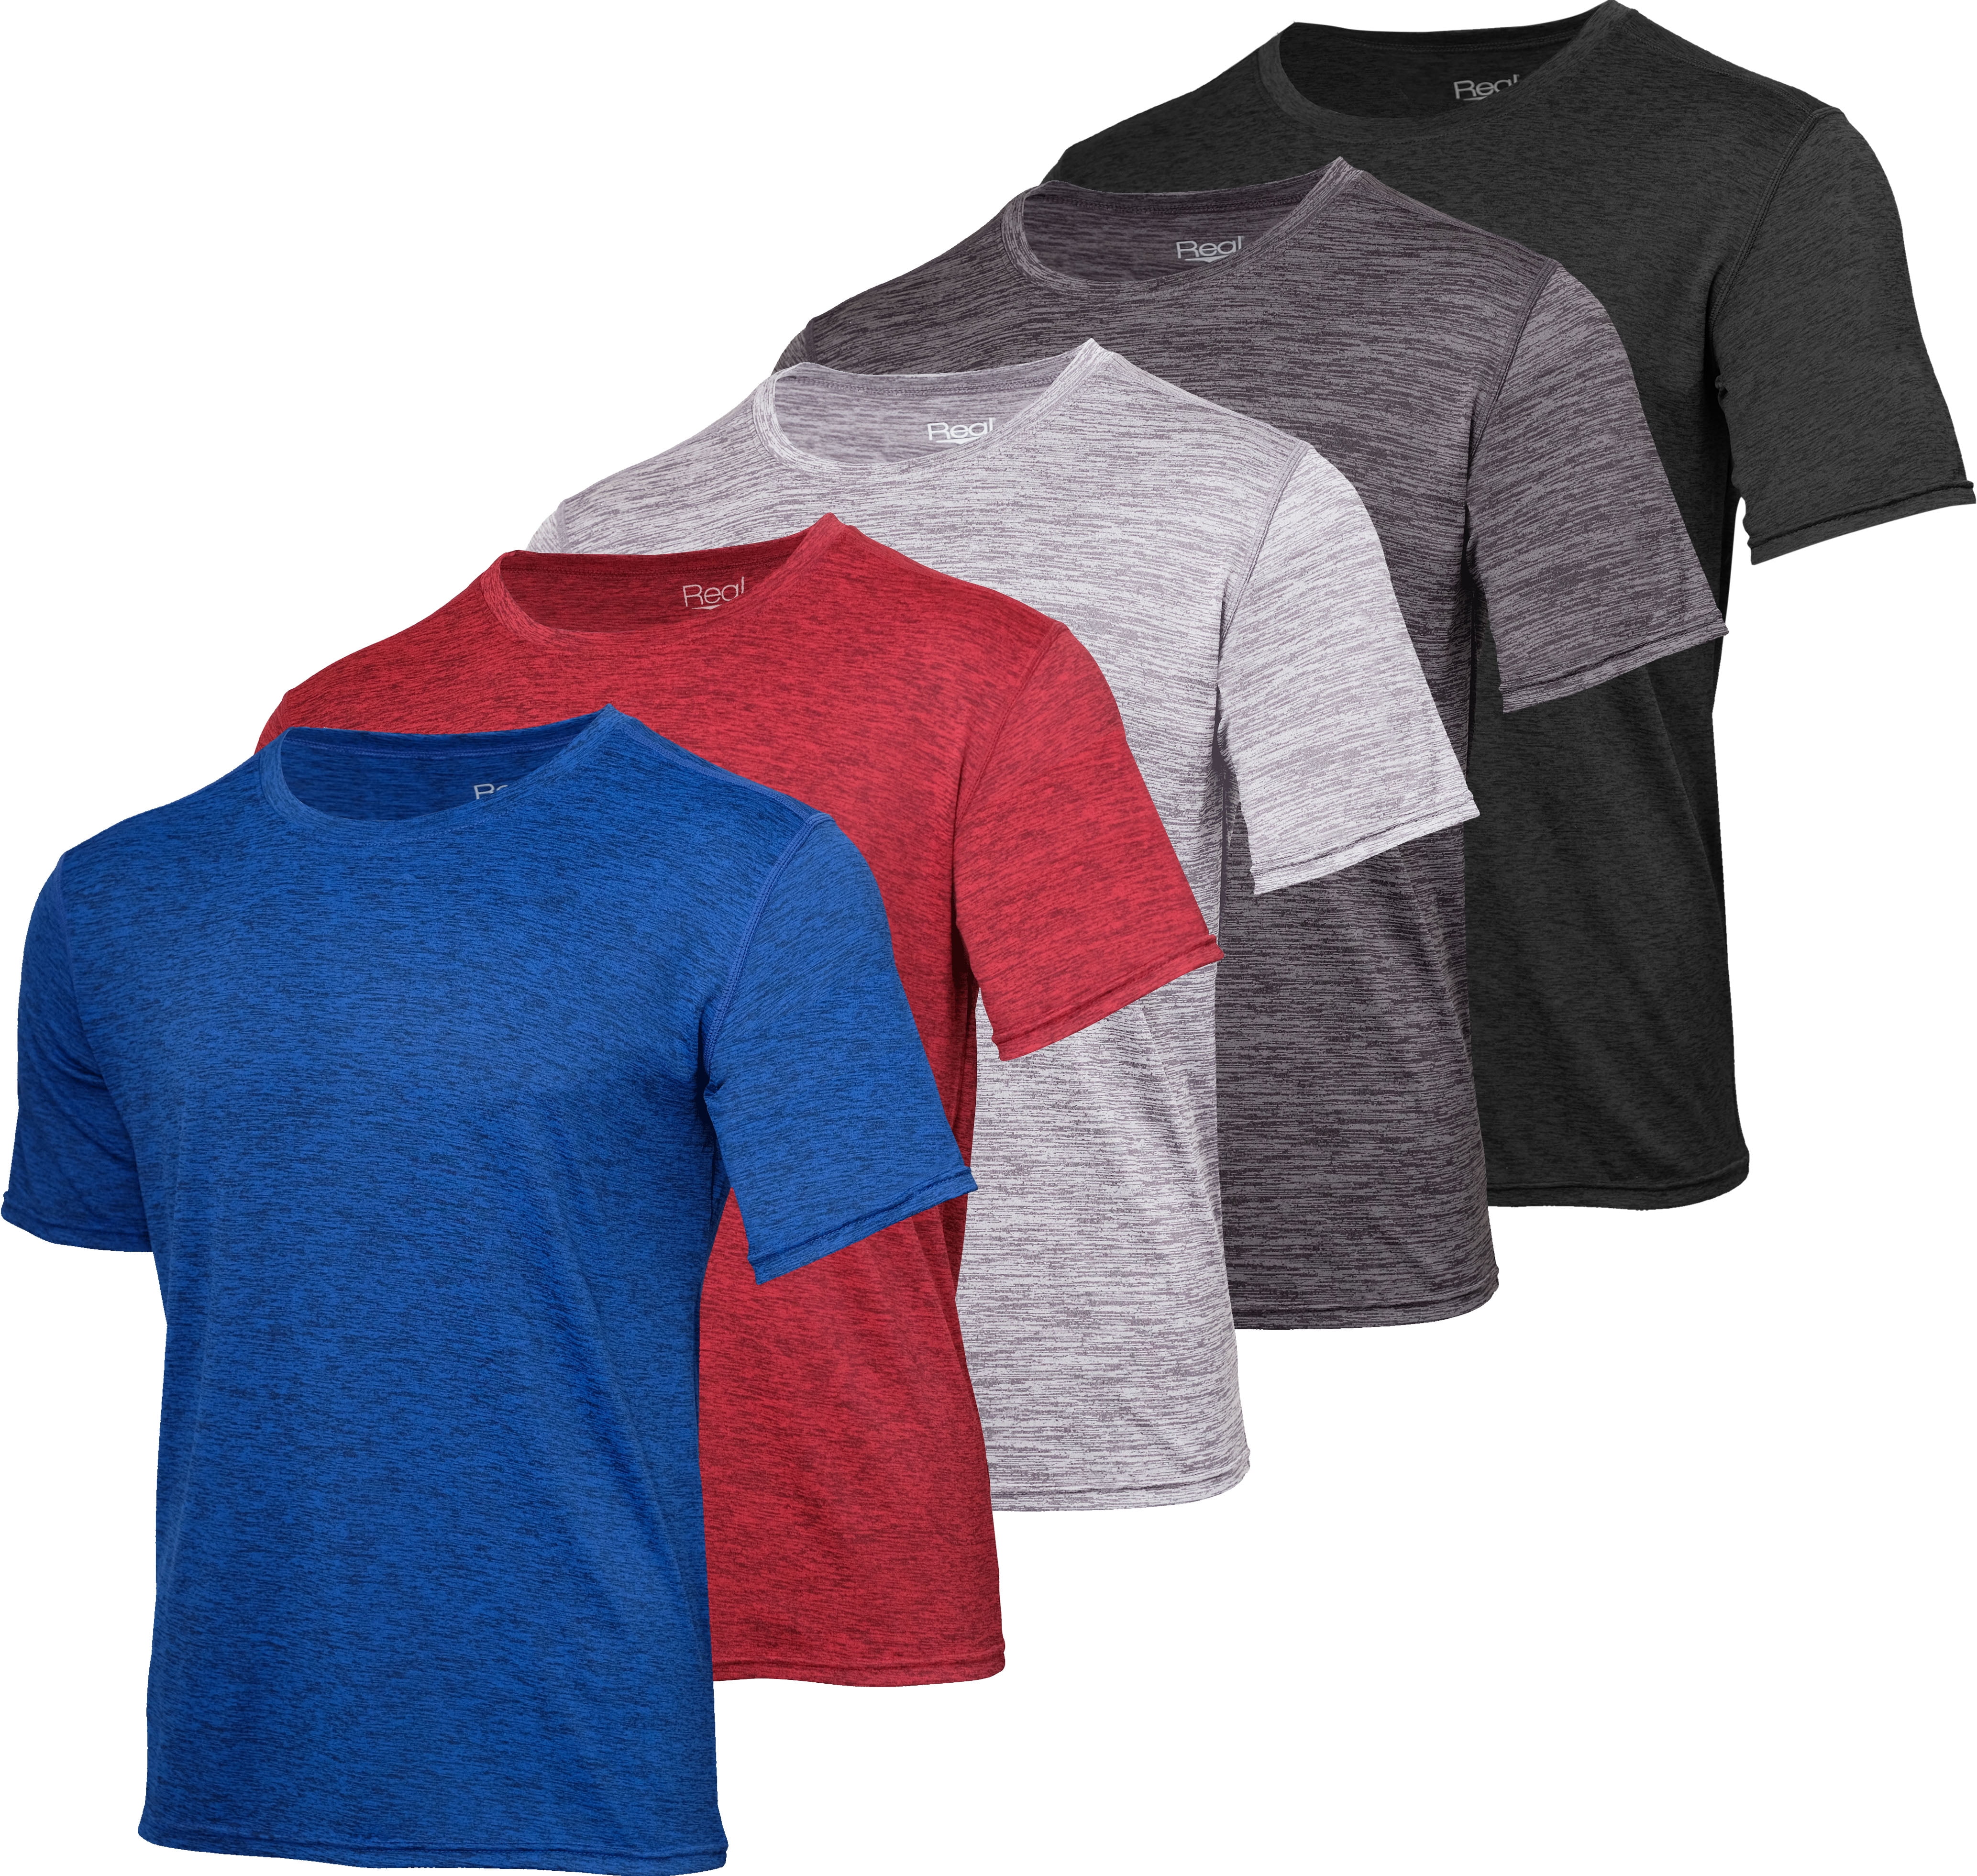 Real Essentials Boys Undershirts, 5 Pack Dry-Fit Moisture Wicking ...